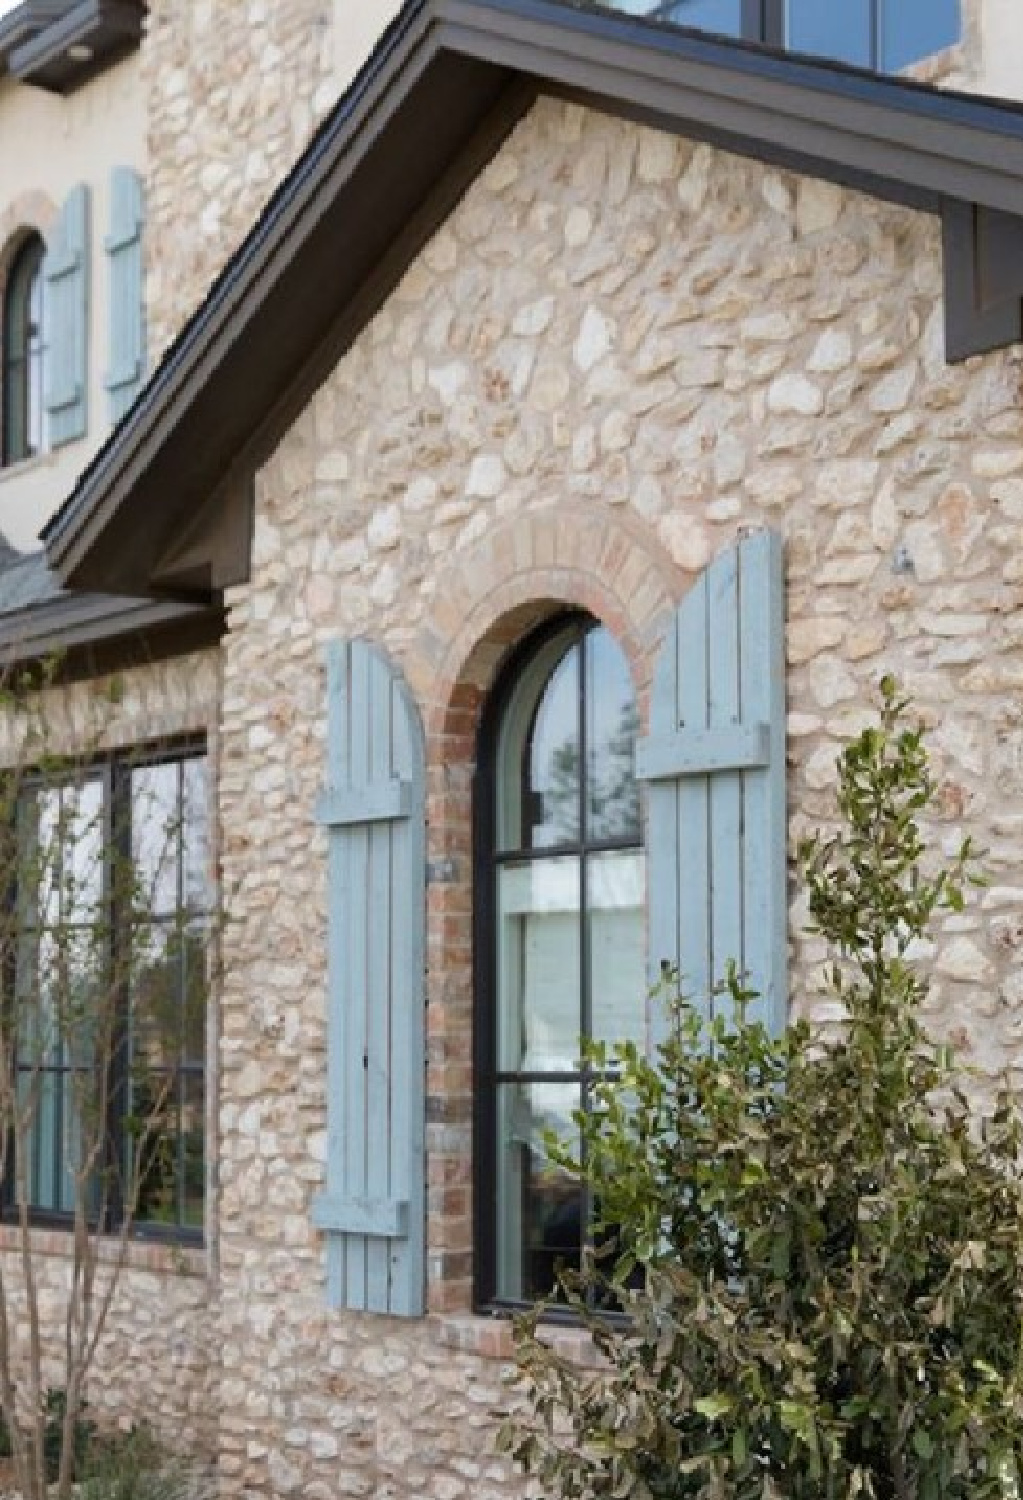 Modern French house exterior with warm stone, dark brown trim, arched windows, and duck egg or French blue rustic shutters. Brit Jones Design. #modernfrench #frenchcountryarchitecture